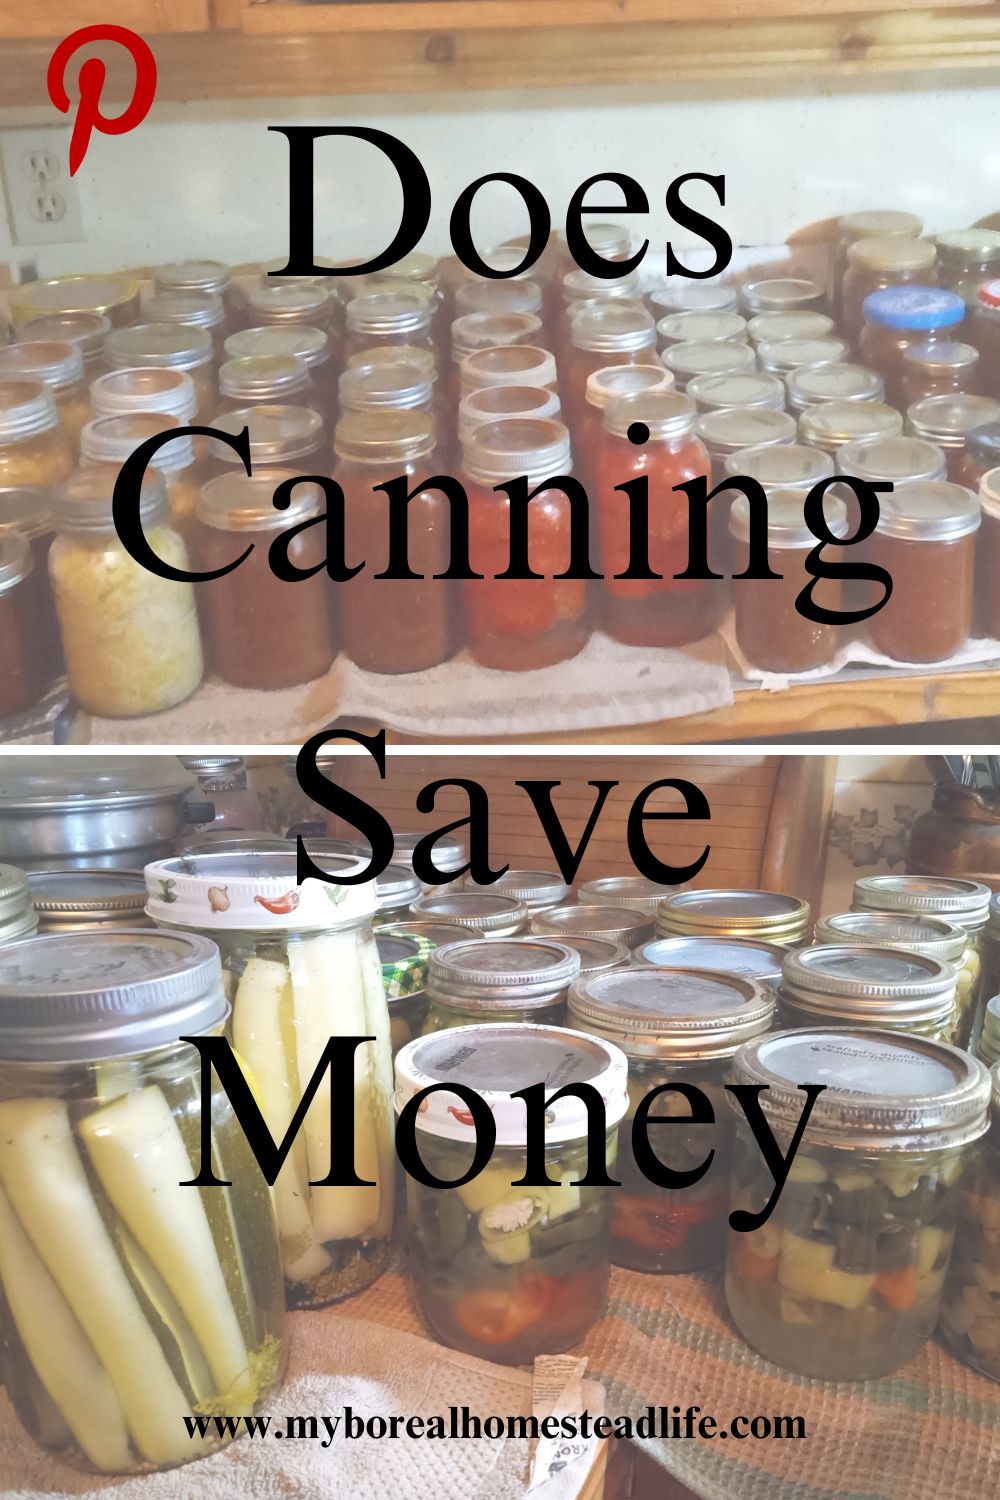 Does Canning save money